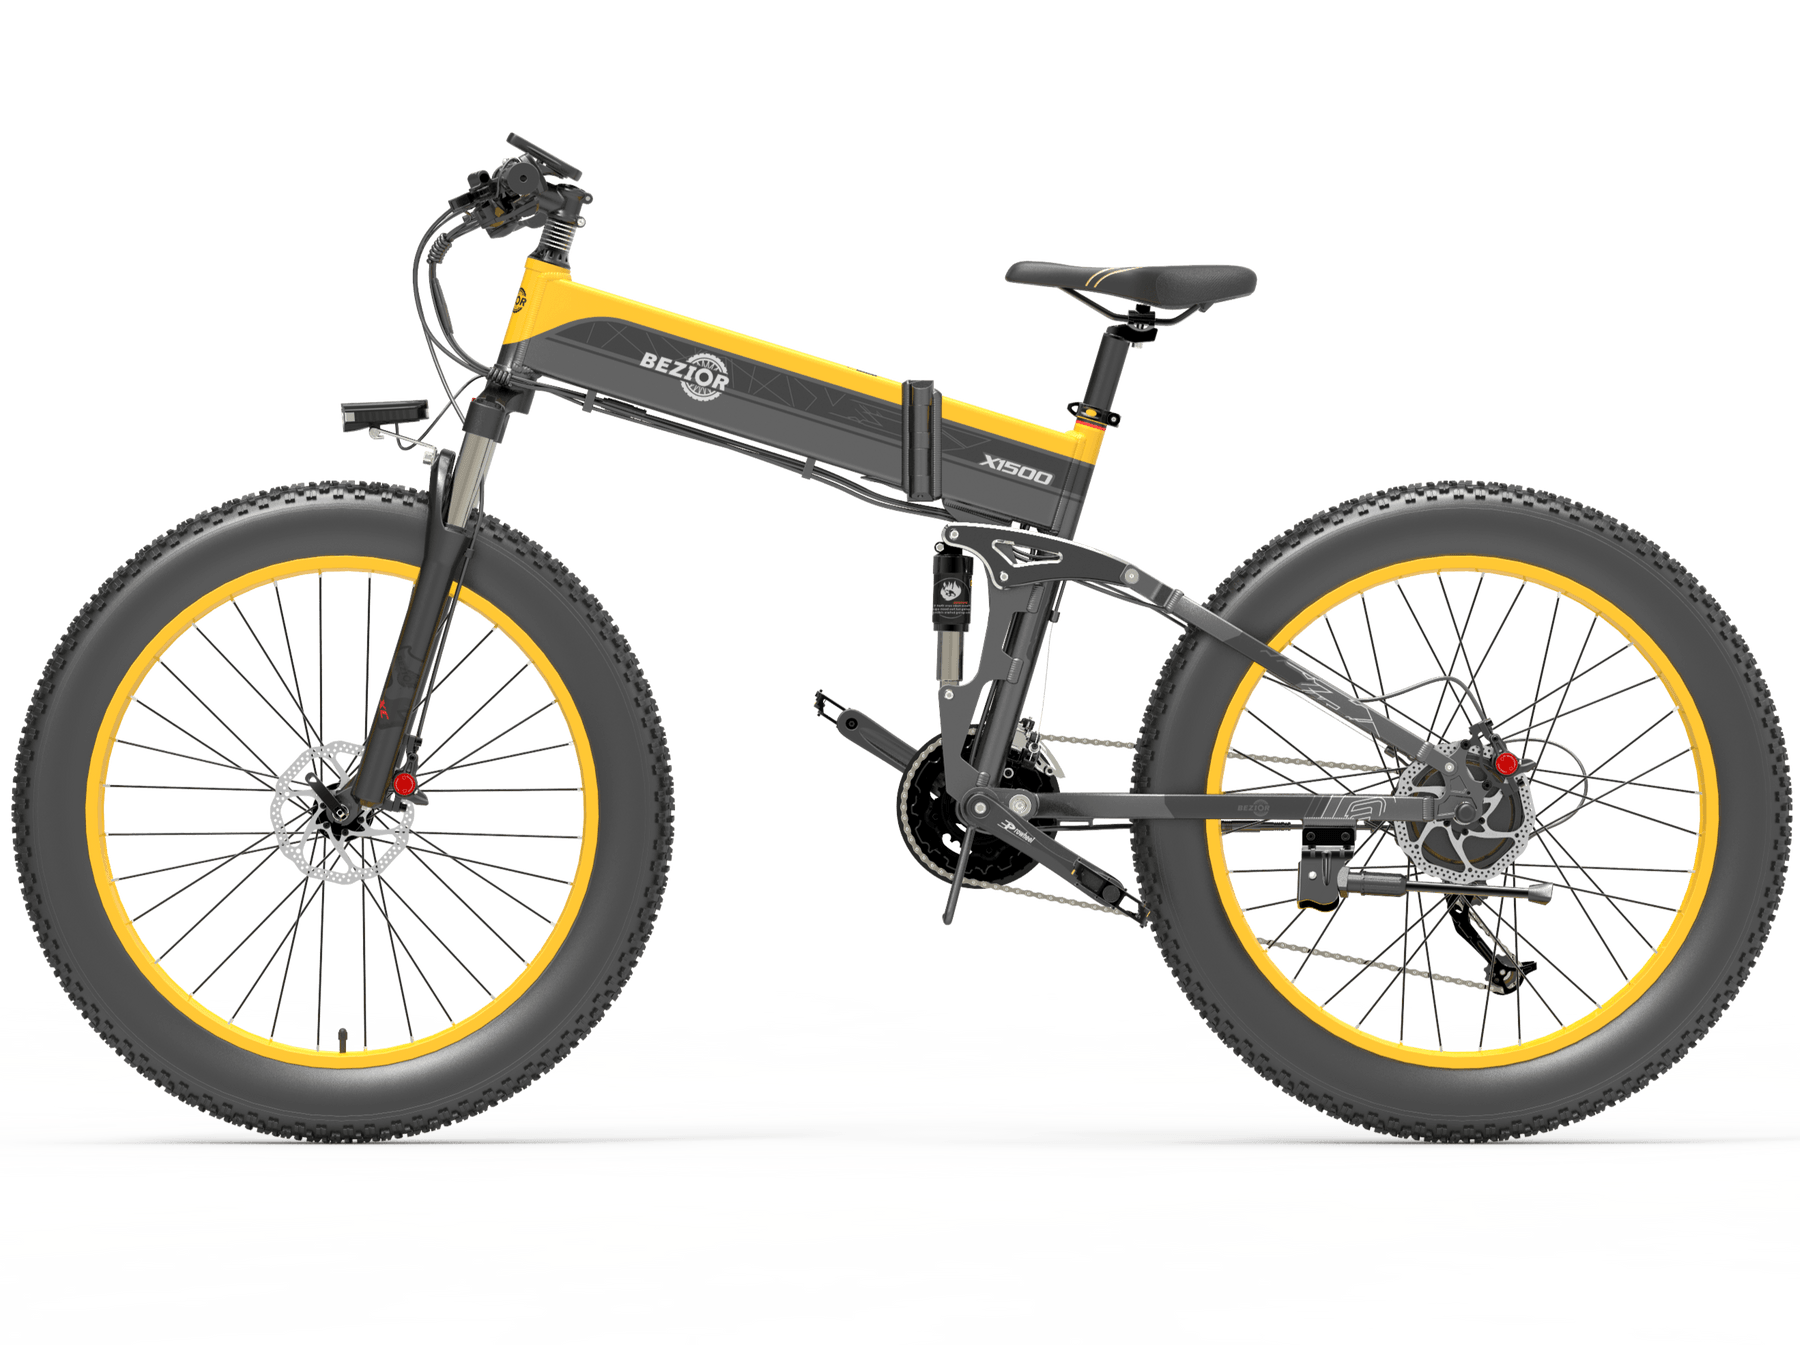 Bezior X1500 Folding Electric Mountain Bike - Pogo cycles UK -cycle to work scheme available